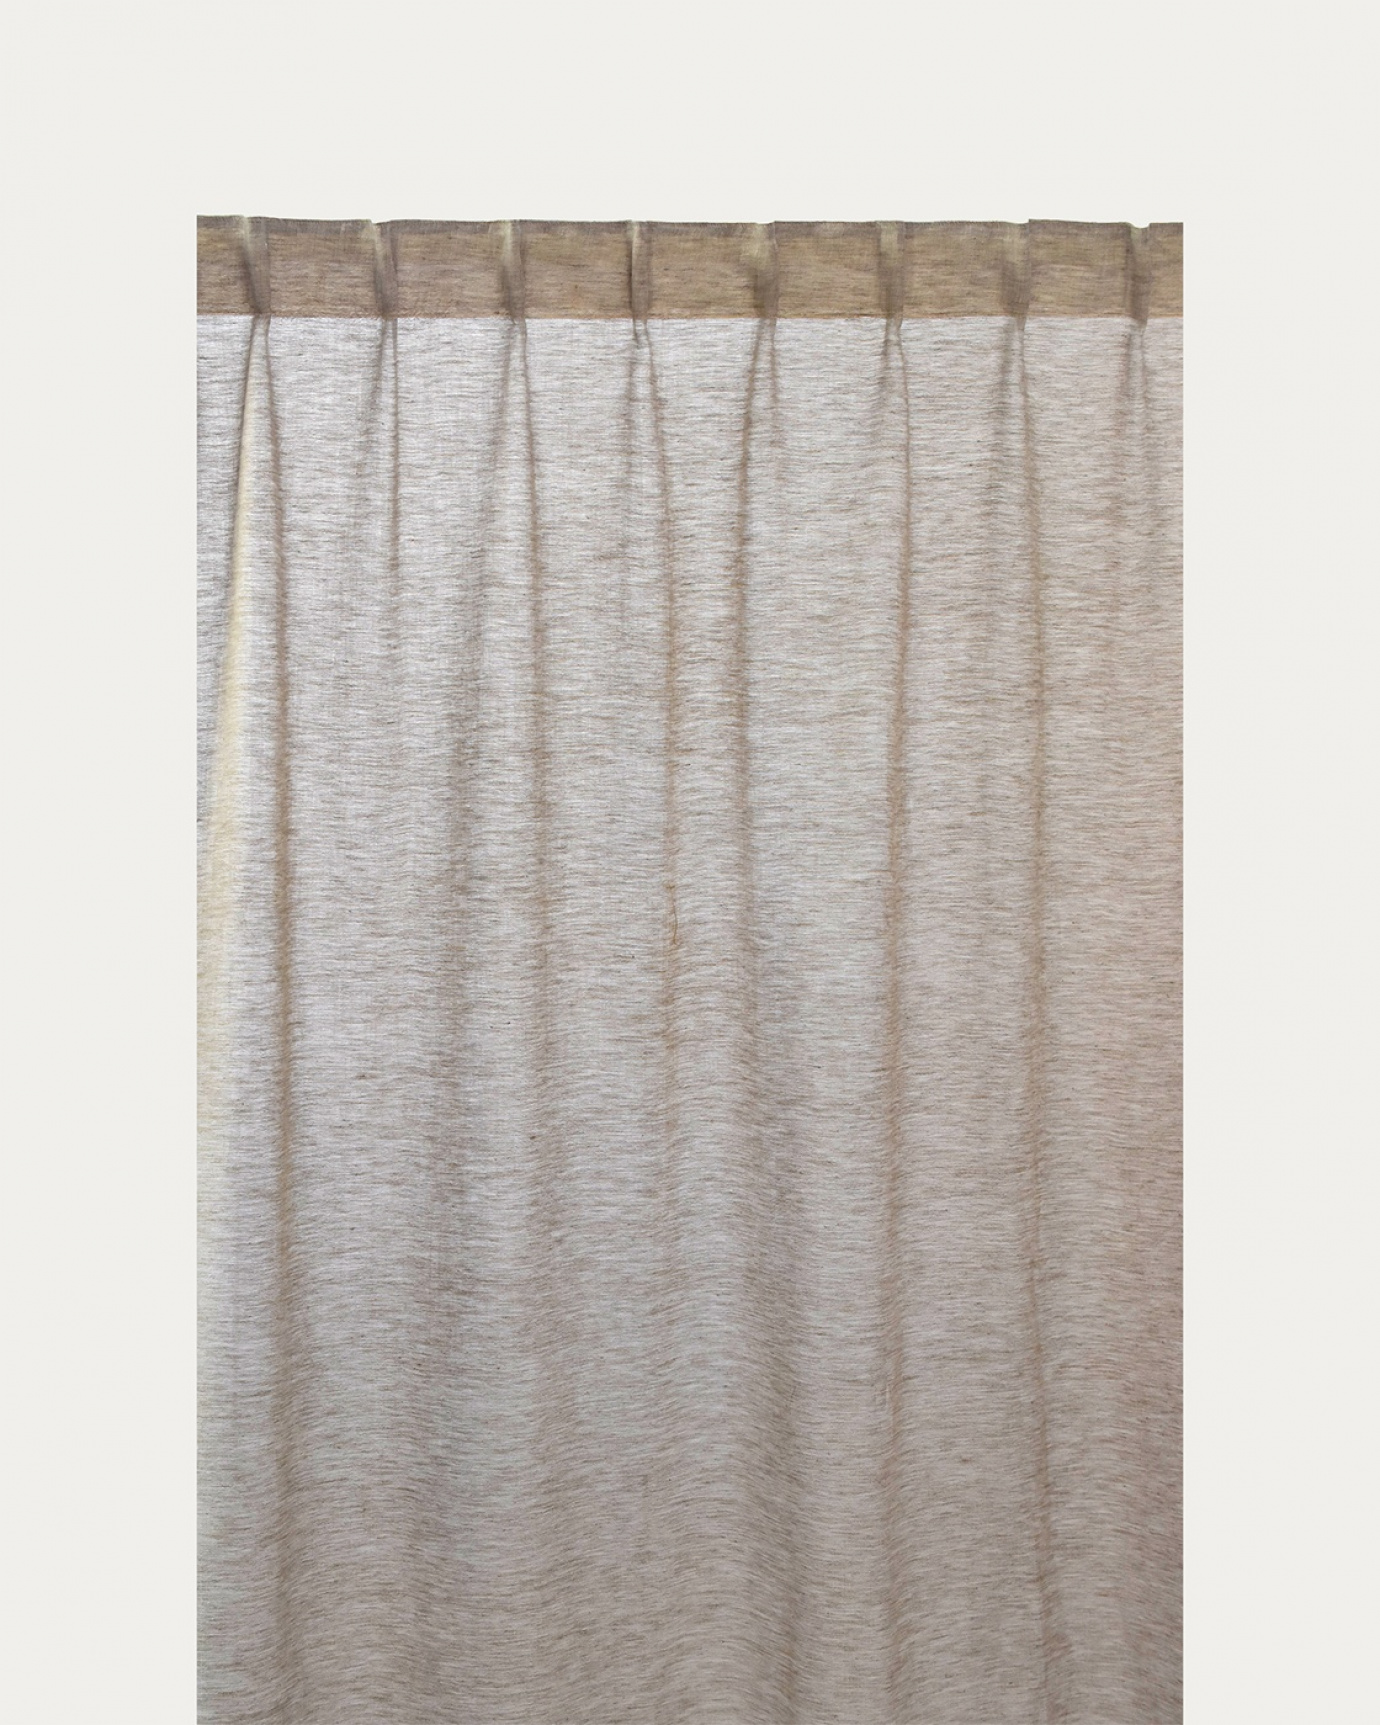 Product image mole brown INTERMEZZO curtain of sheer linen with finished pleat tape from LINUM DESIGN. Size 140x290 cm and sold in 2-pack.